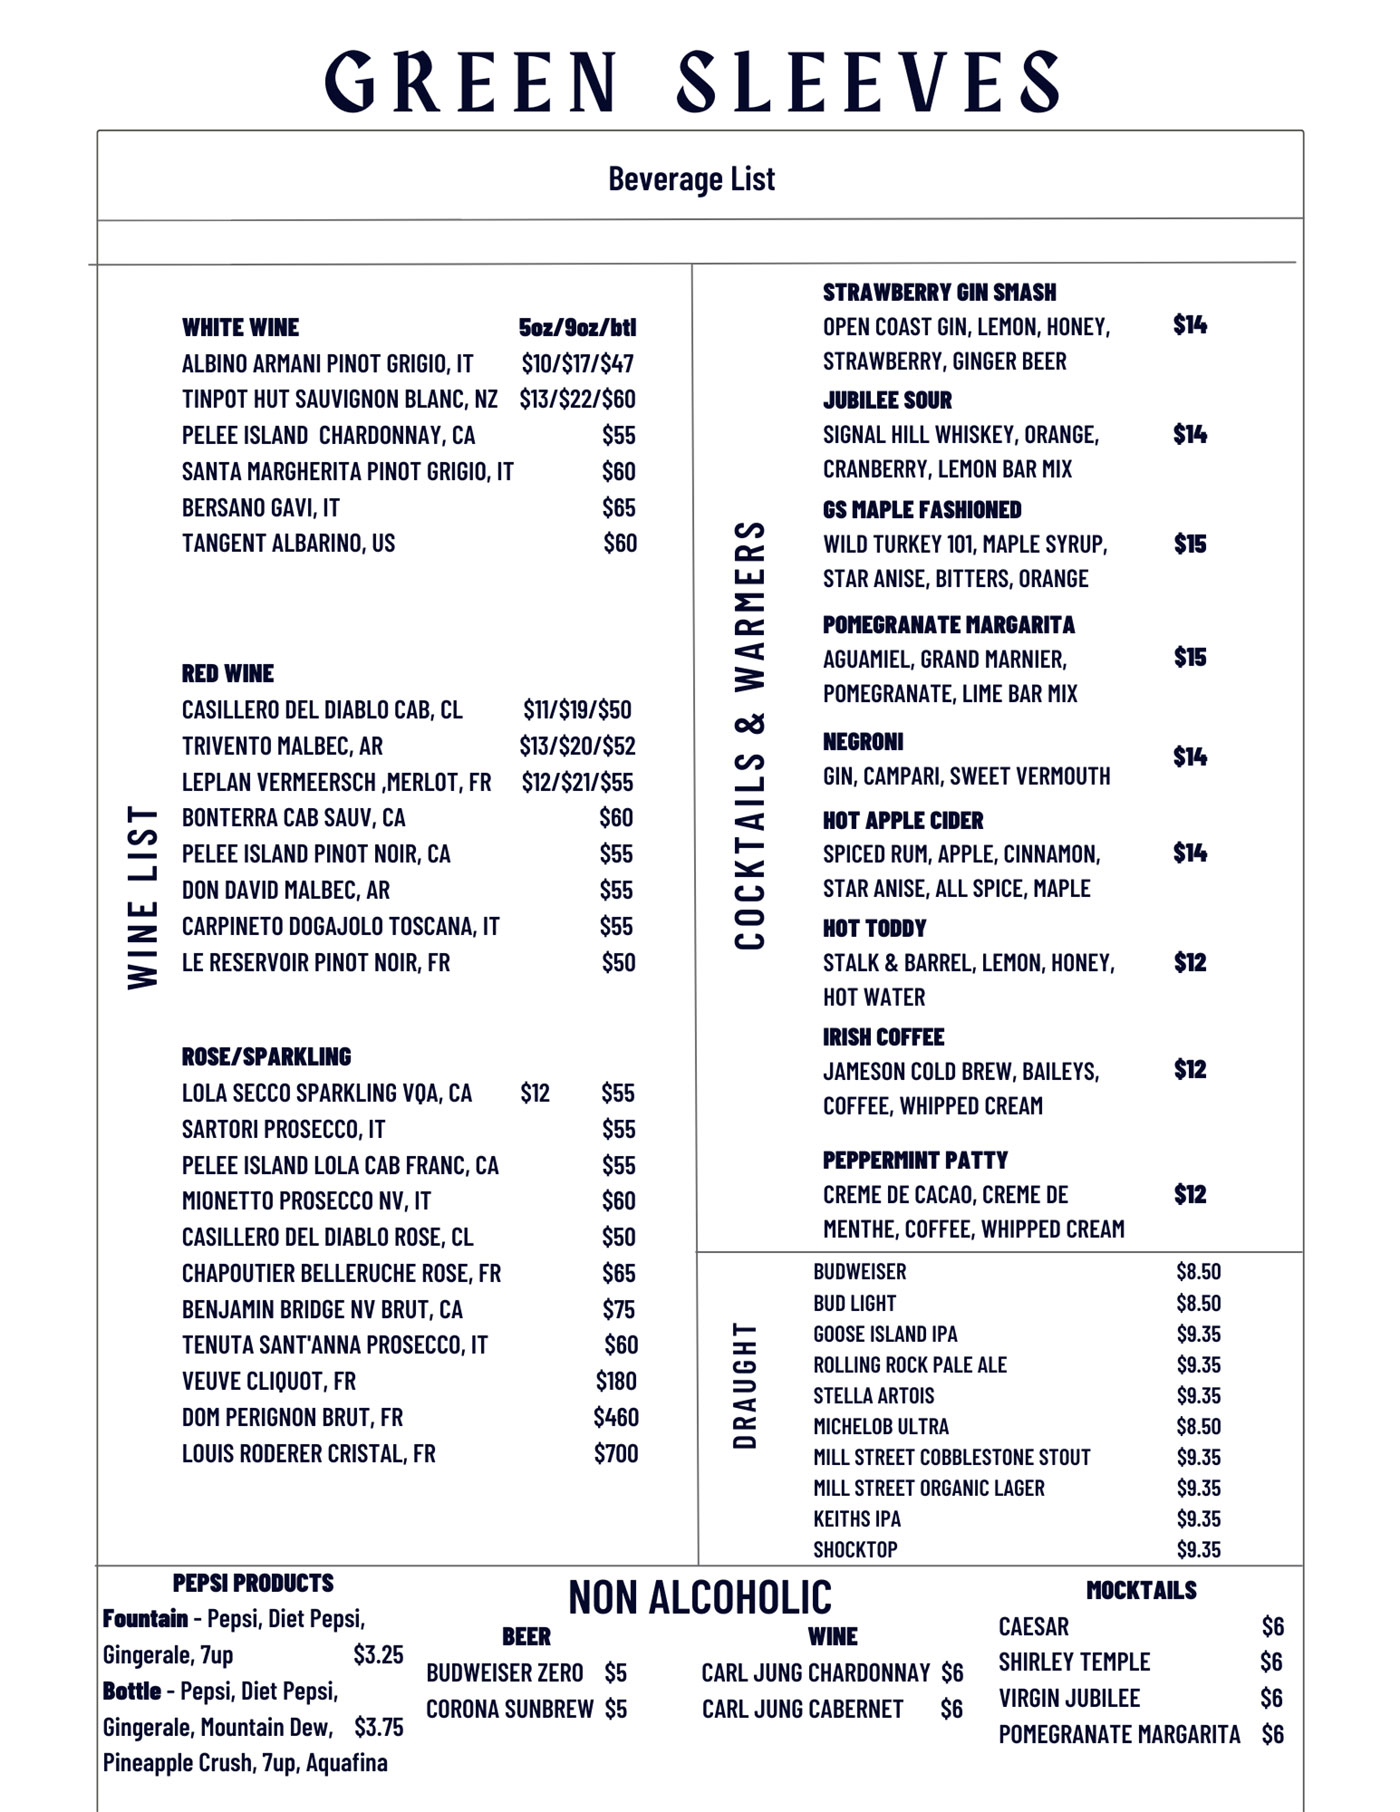 Menu of alcoholic and non-alcoholic beverages at Green Sleeves Pub & Eatery on George Street